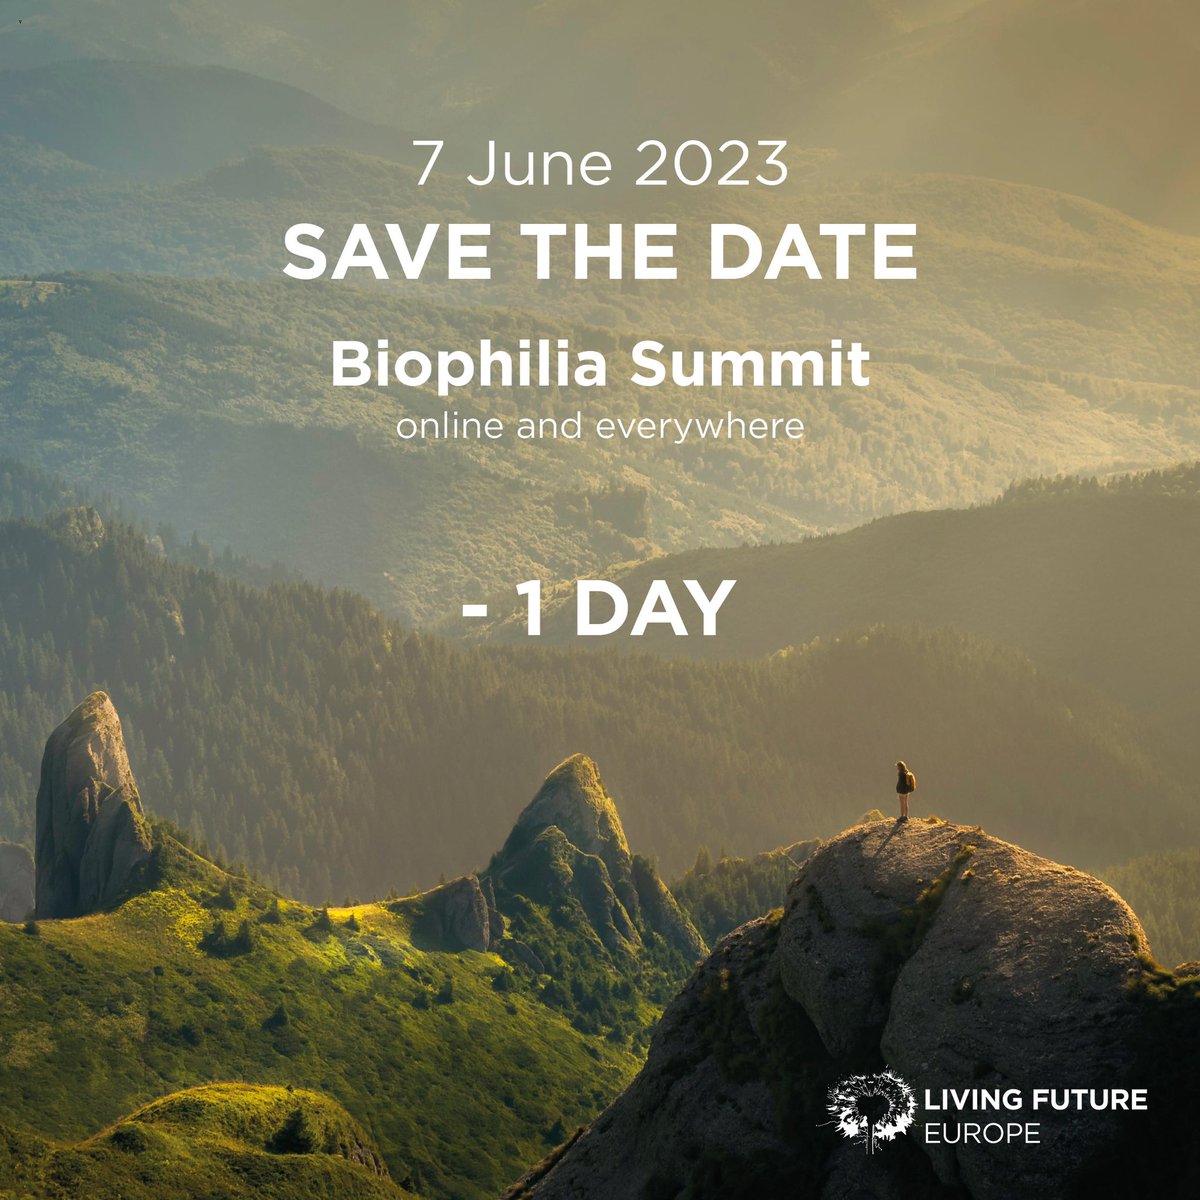 I’ll be speaking about my favourite locality regenerative biophilic fashion projects as a part of this one day summit .. join here - lfeurope.regfox.com/biophilia-summ… thanks @fairsnape for inviting me into the discussion